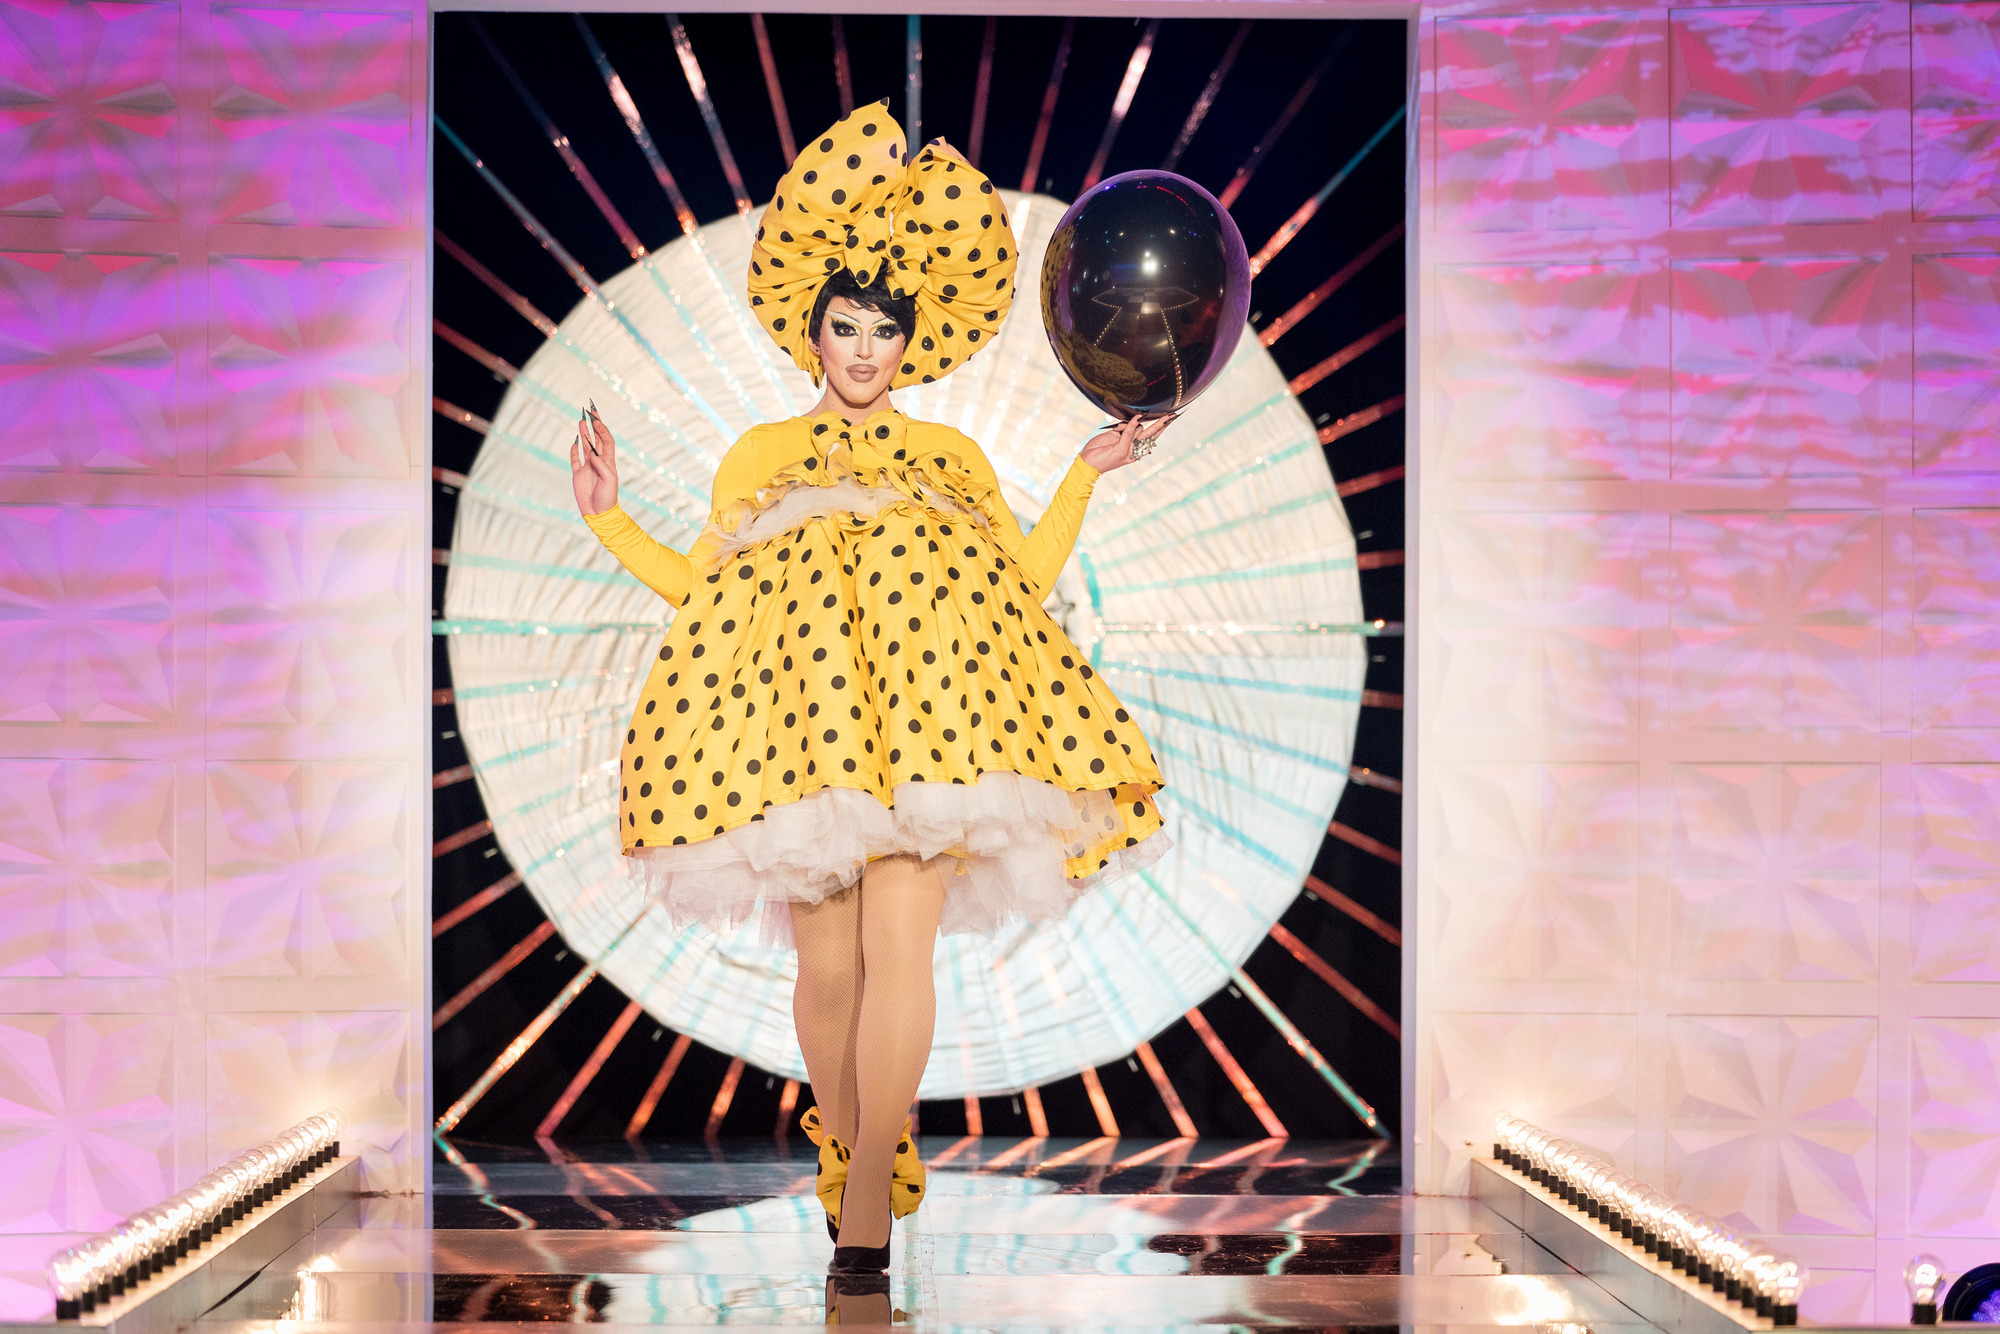 The internet might lose its mind at this season of 'Drag Race UK' after another shocking elimination. Hear from this week's eliminated queen.